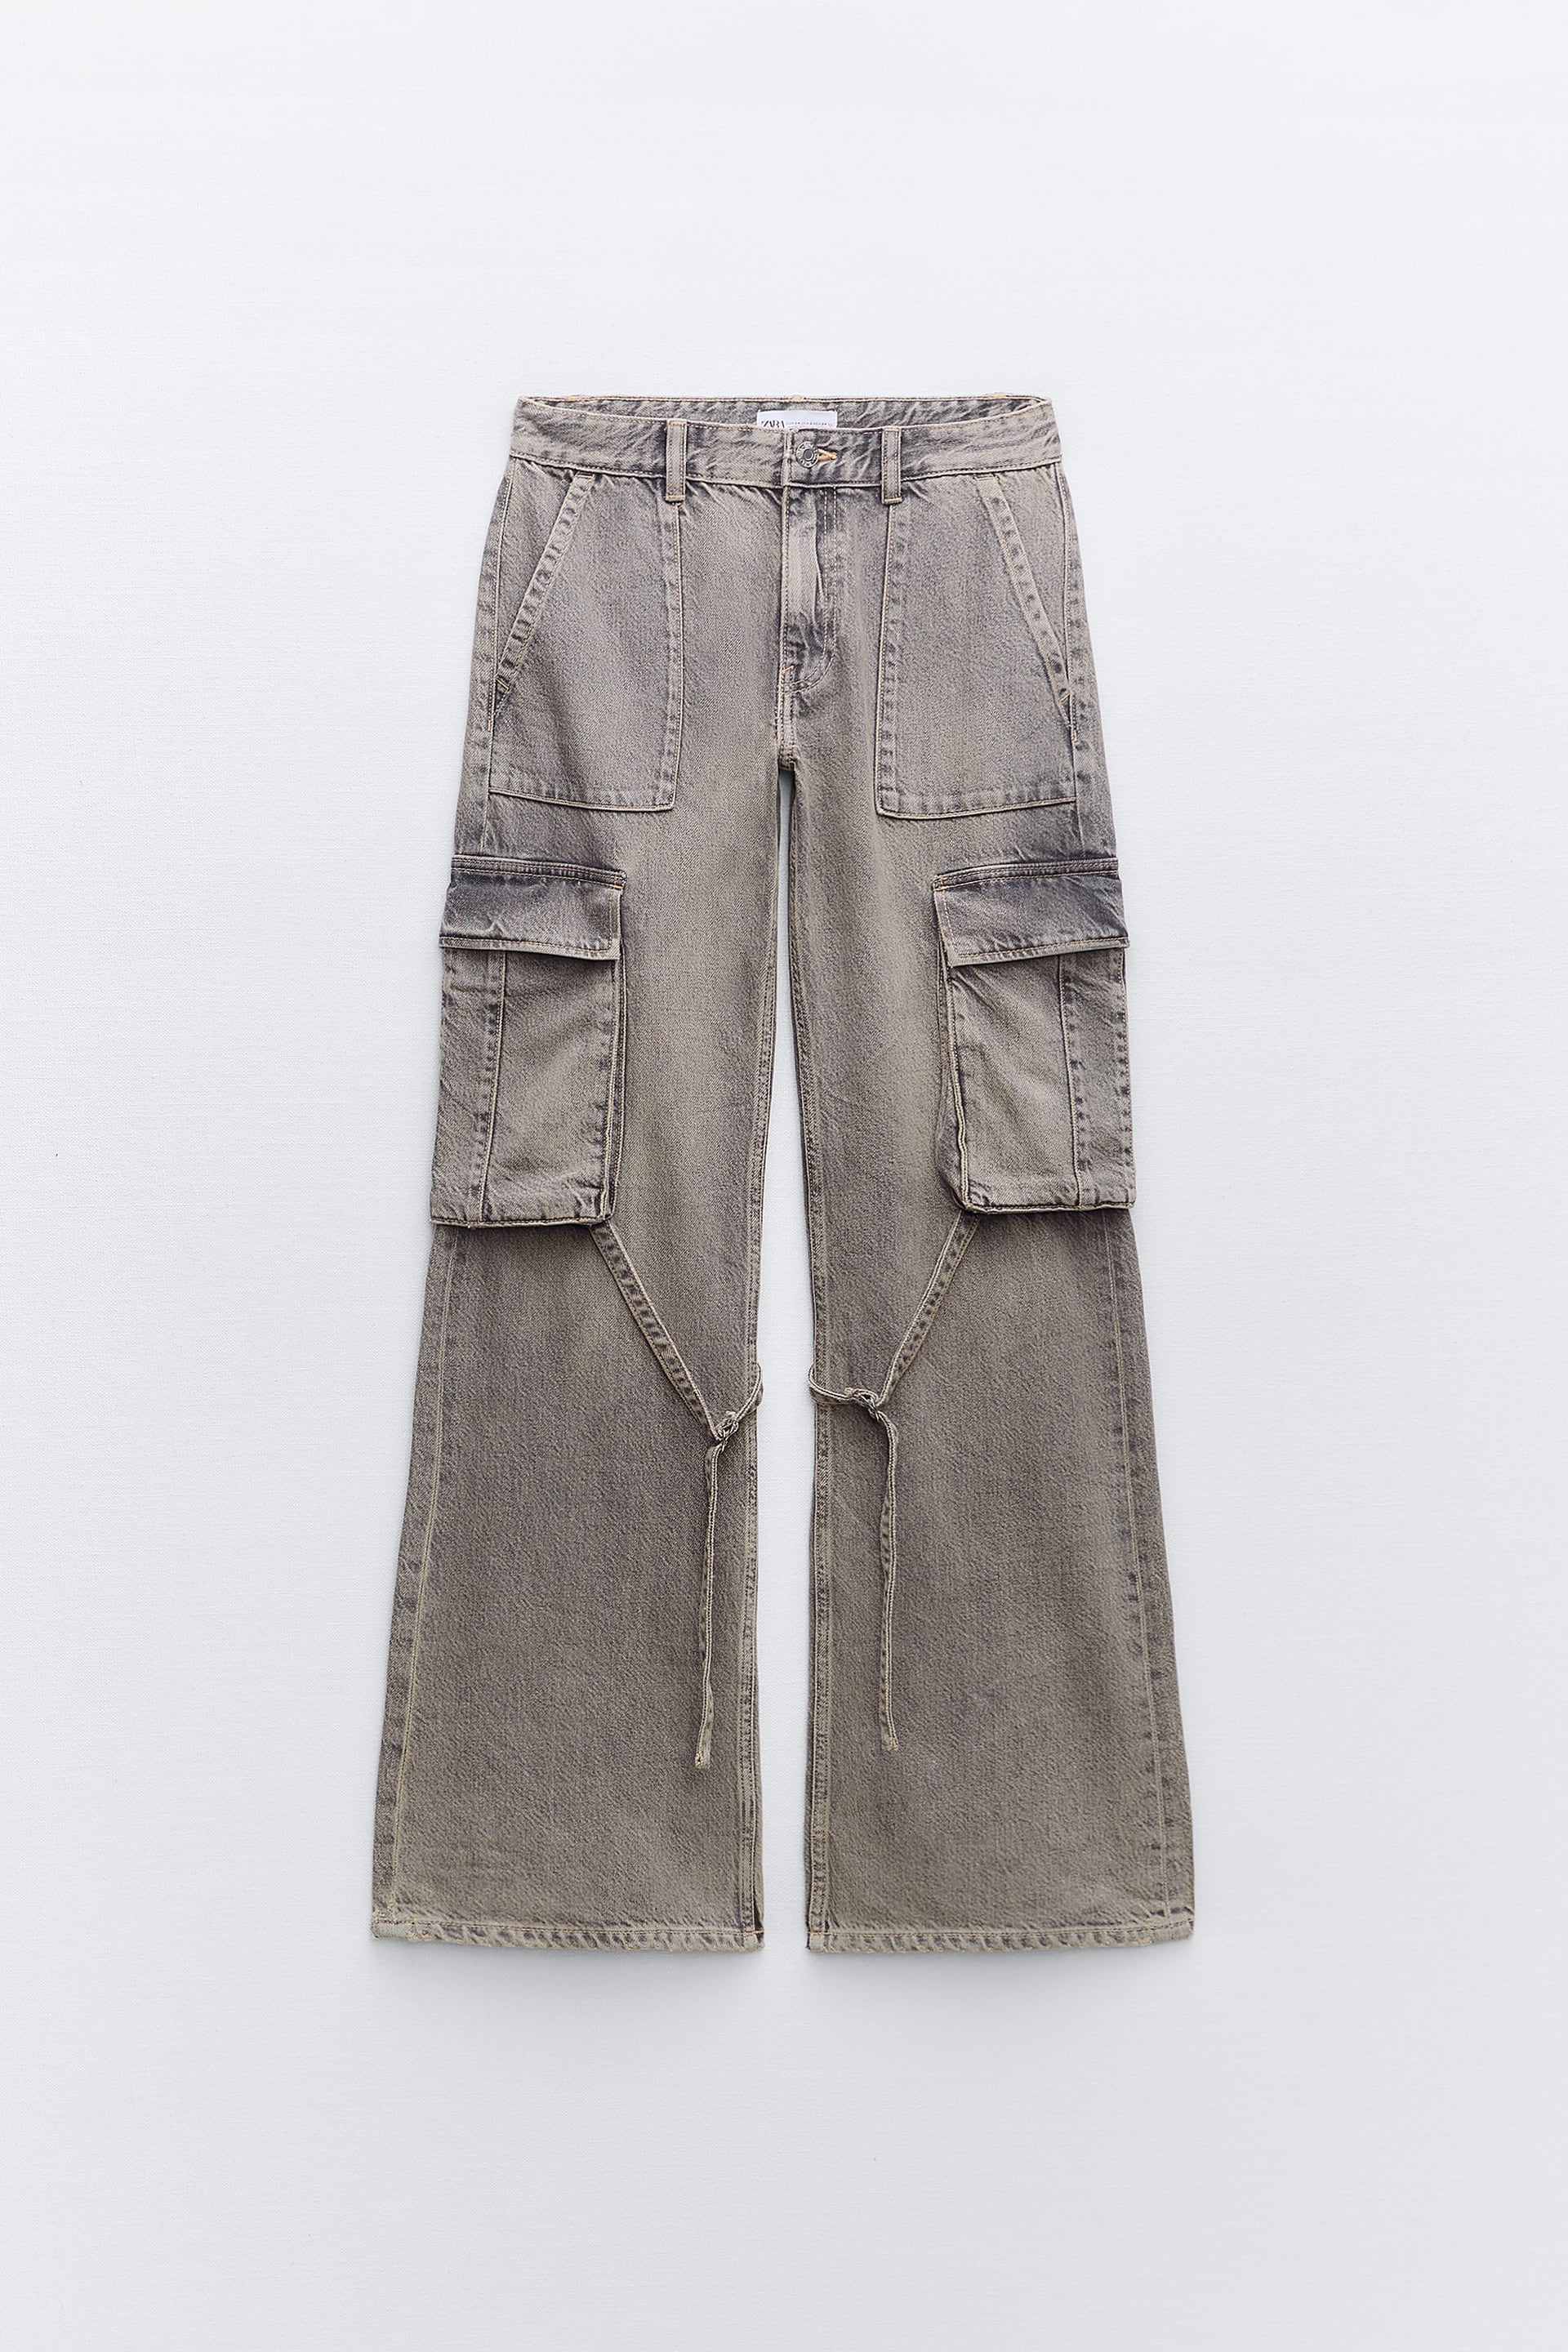 MID-RISE TRF CARGO JEANS - Anthracite grey | ZARA United States